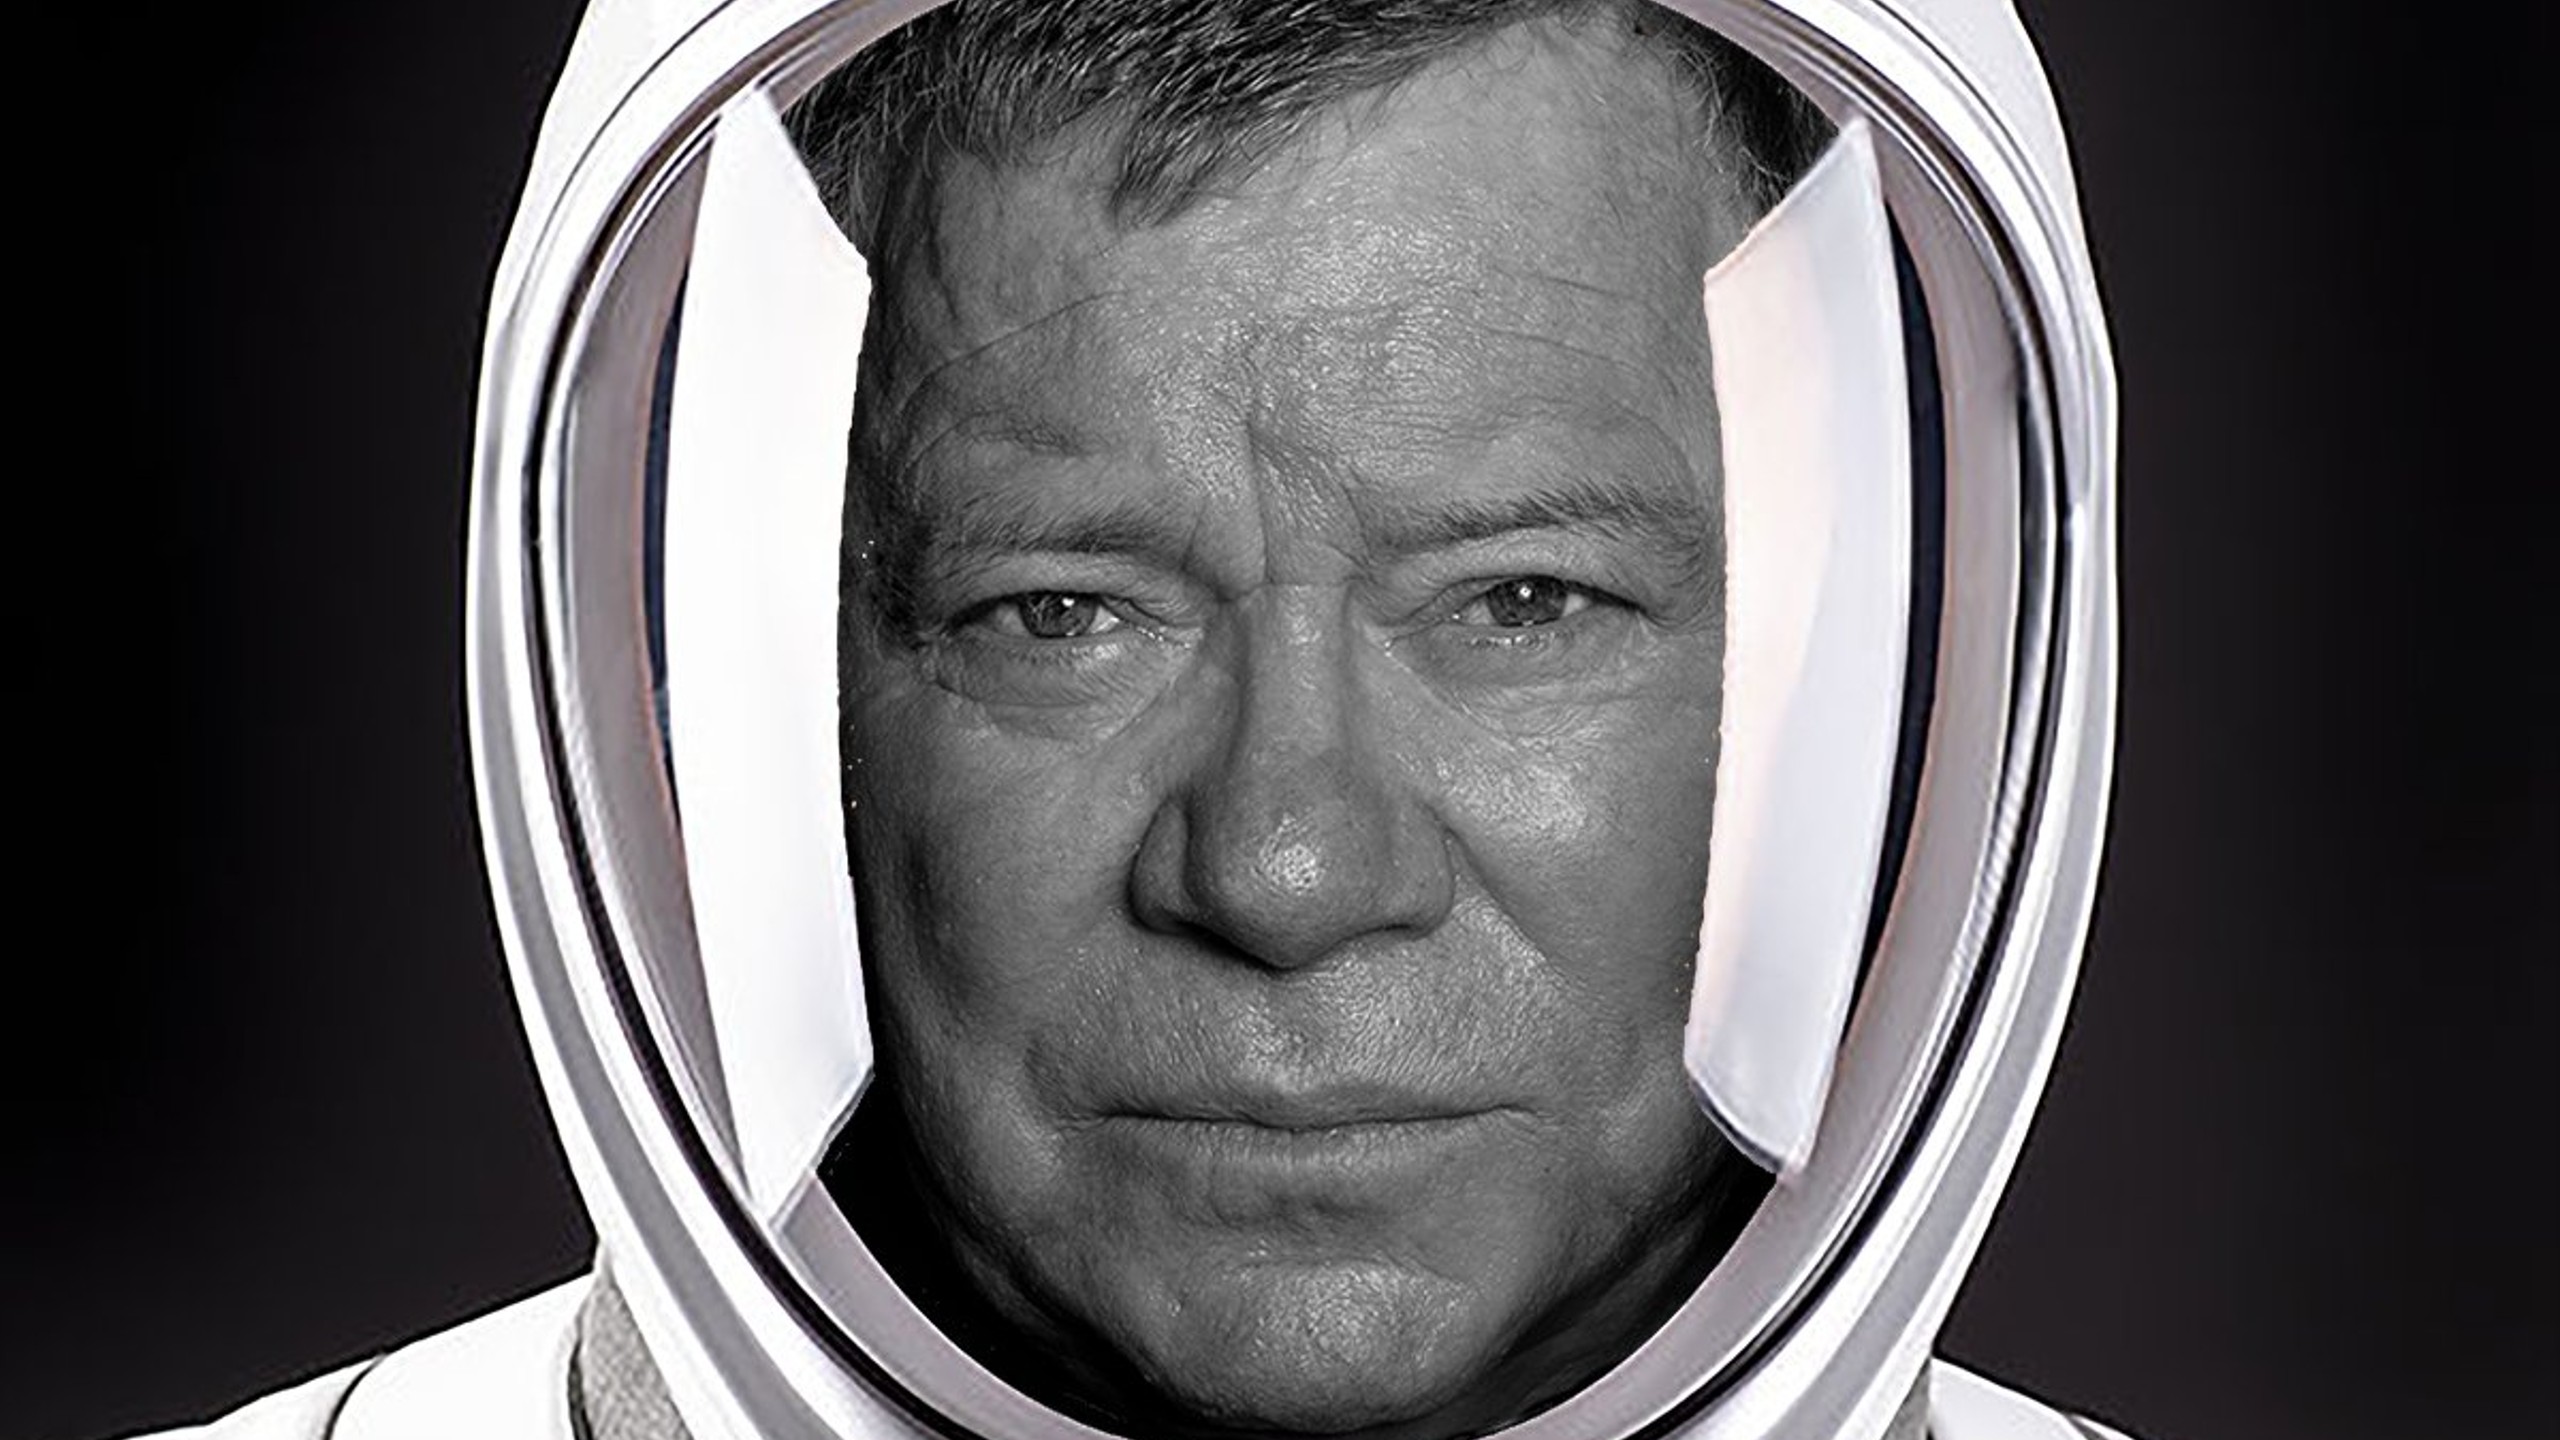 William Shatner Going to Space